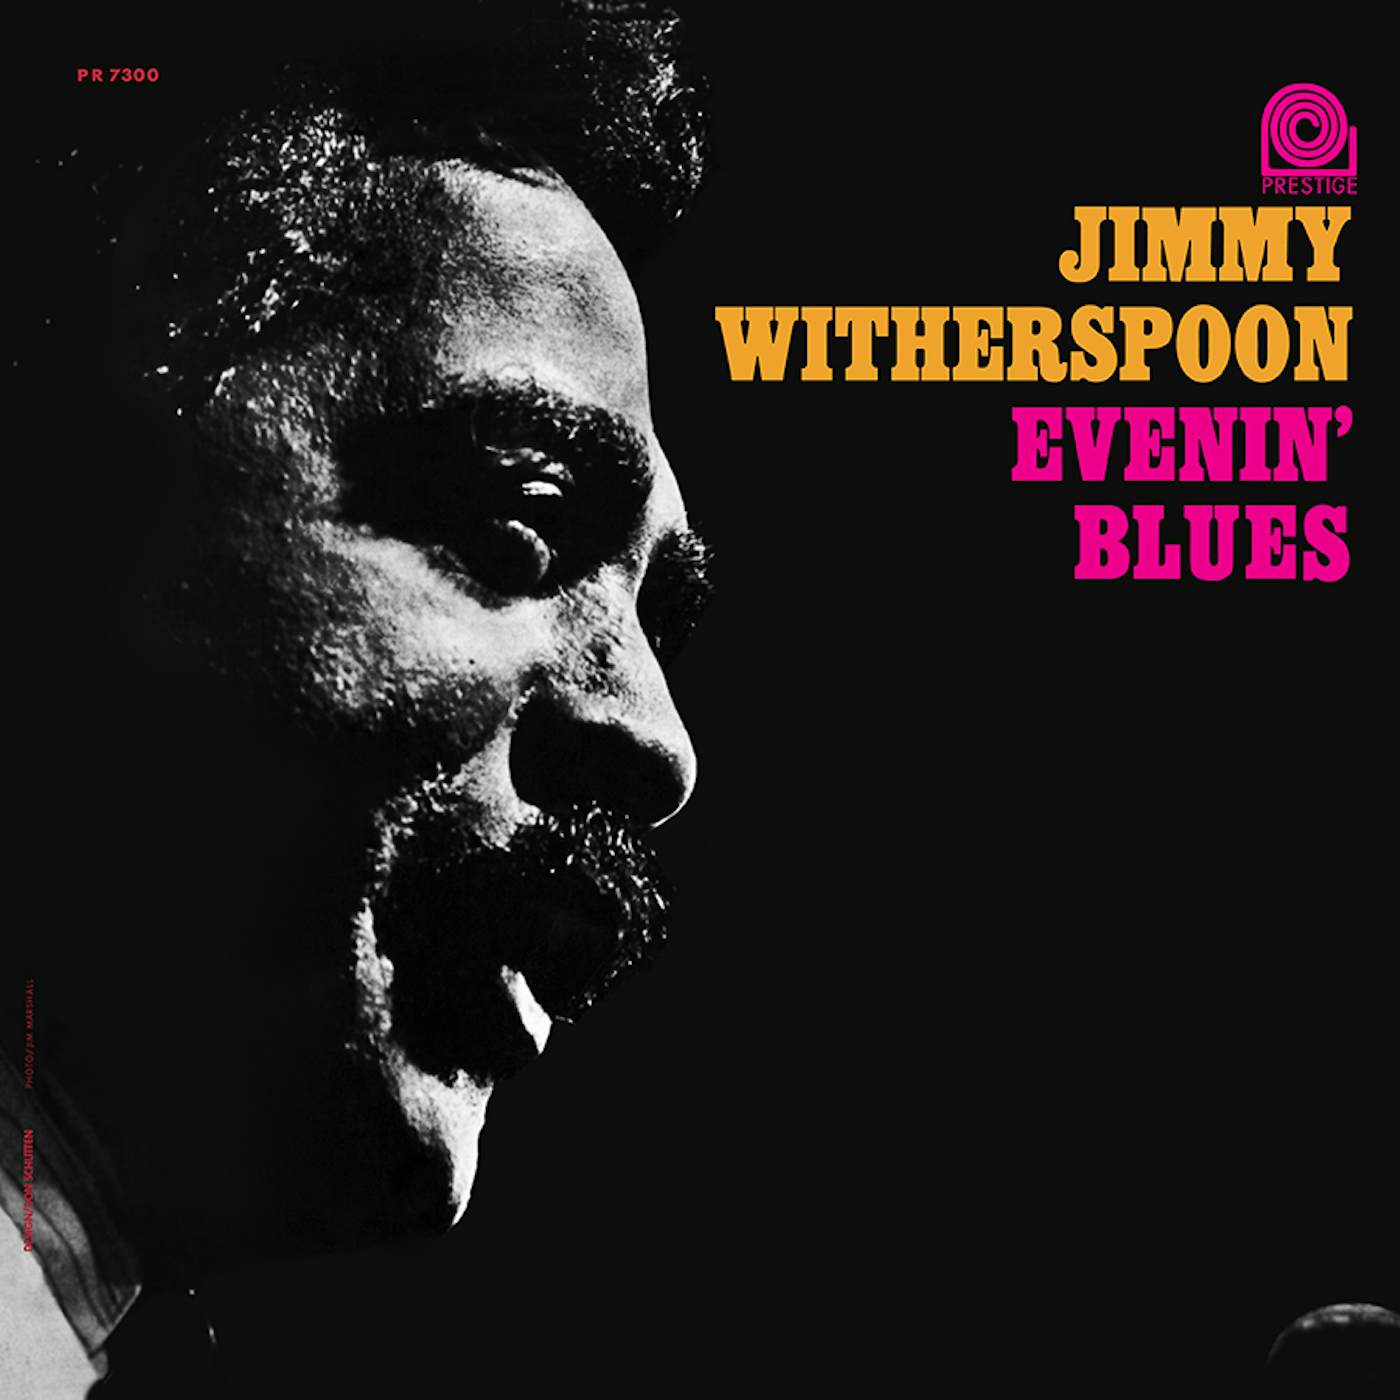 Jimmy Witherspoon Evenin' Blues Vinyl Record